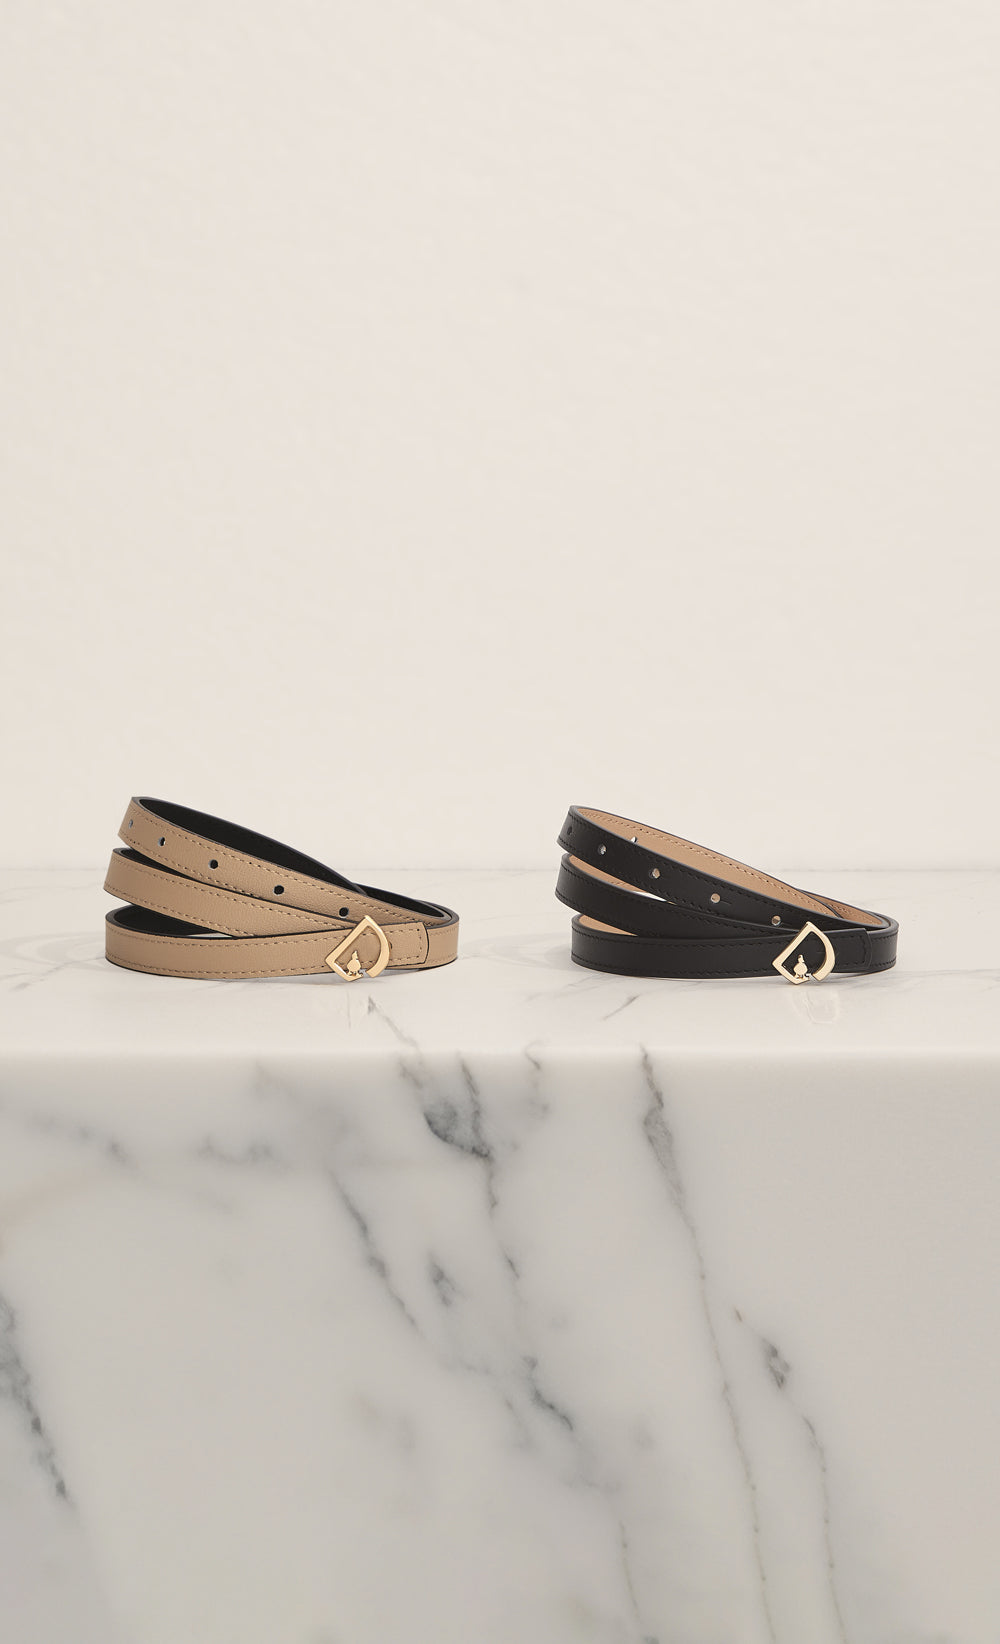 The Classic Reversible D Belt in Black & Taupe